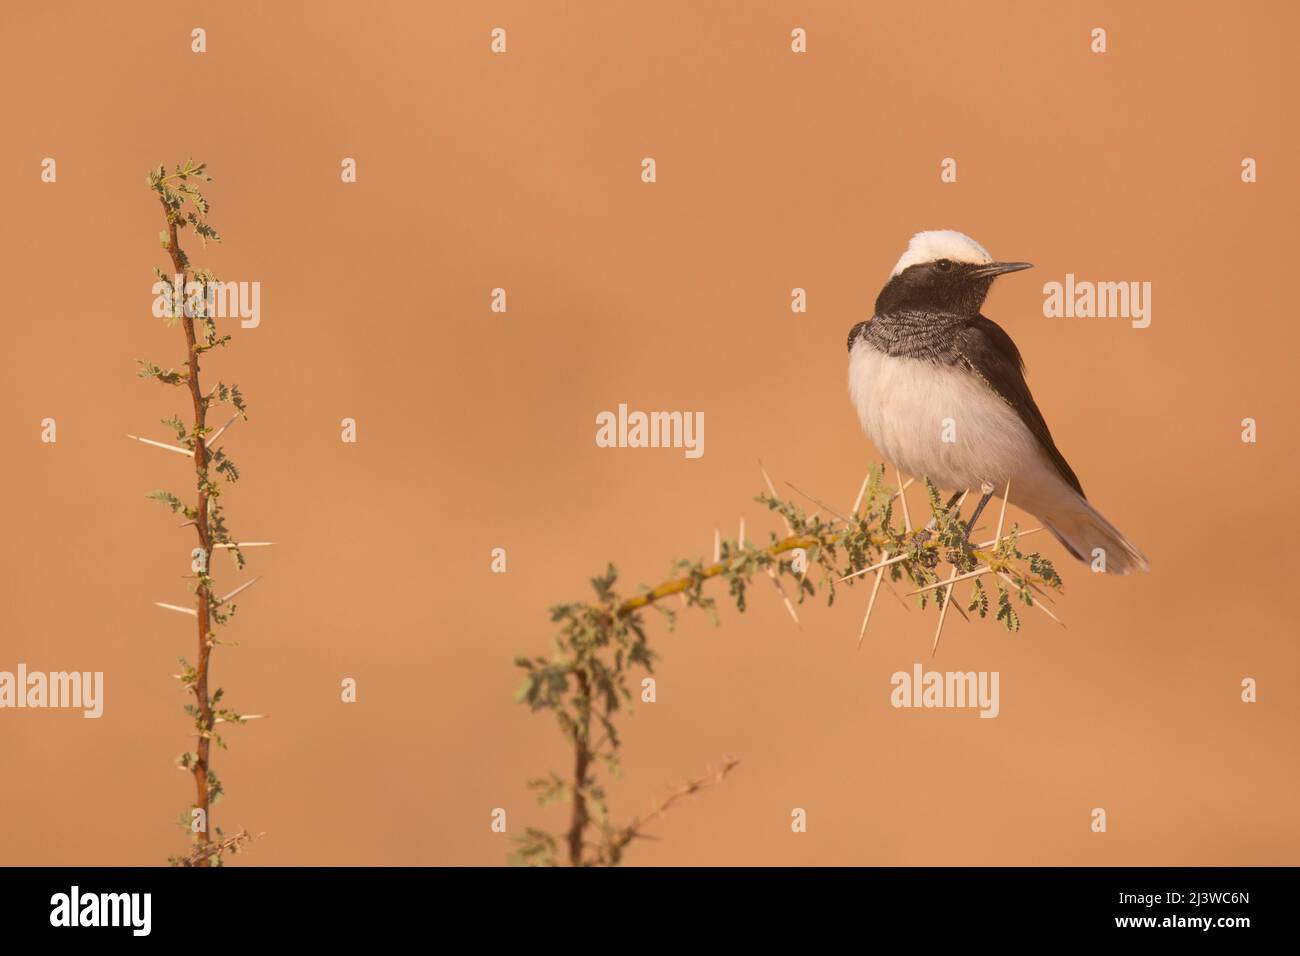 Male hooded wheatear (Oenanthe monacha), sitting on a thorny bush. Photographed in Israel in November Stock Photo